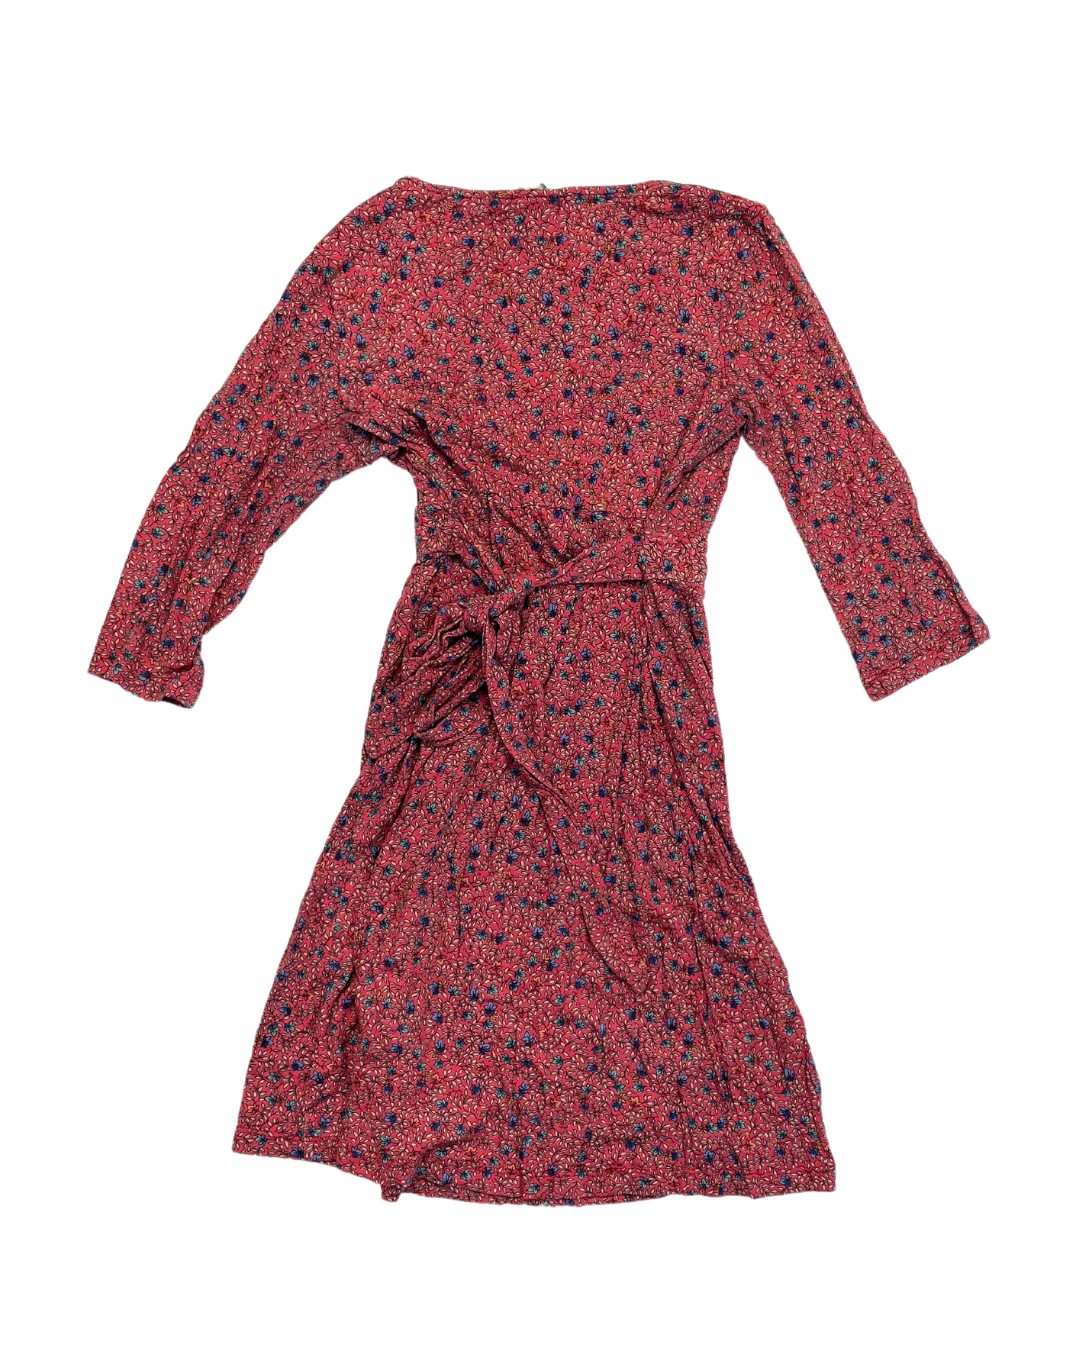 Fat Face Red Floral Dress